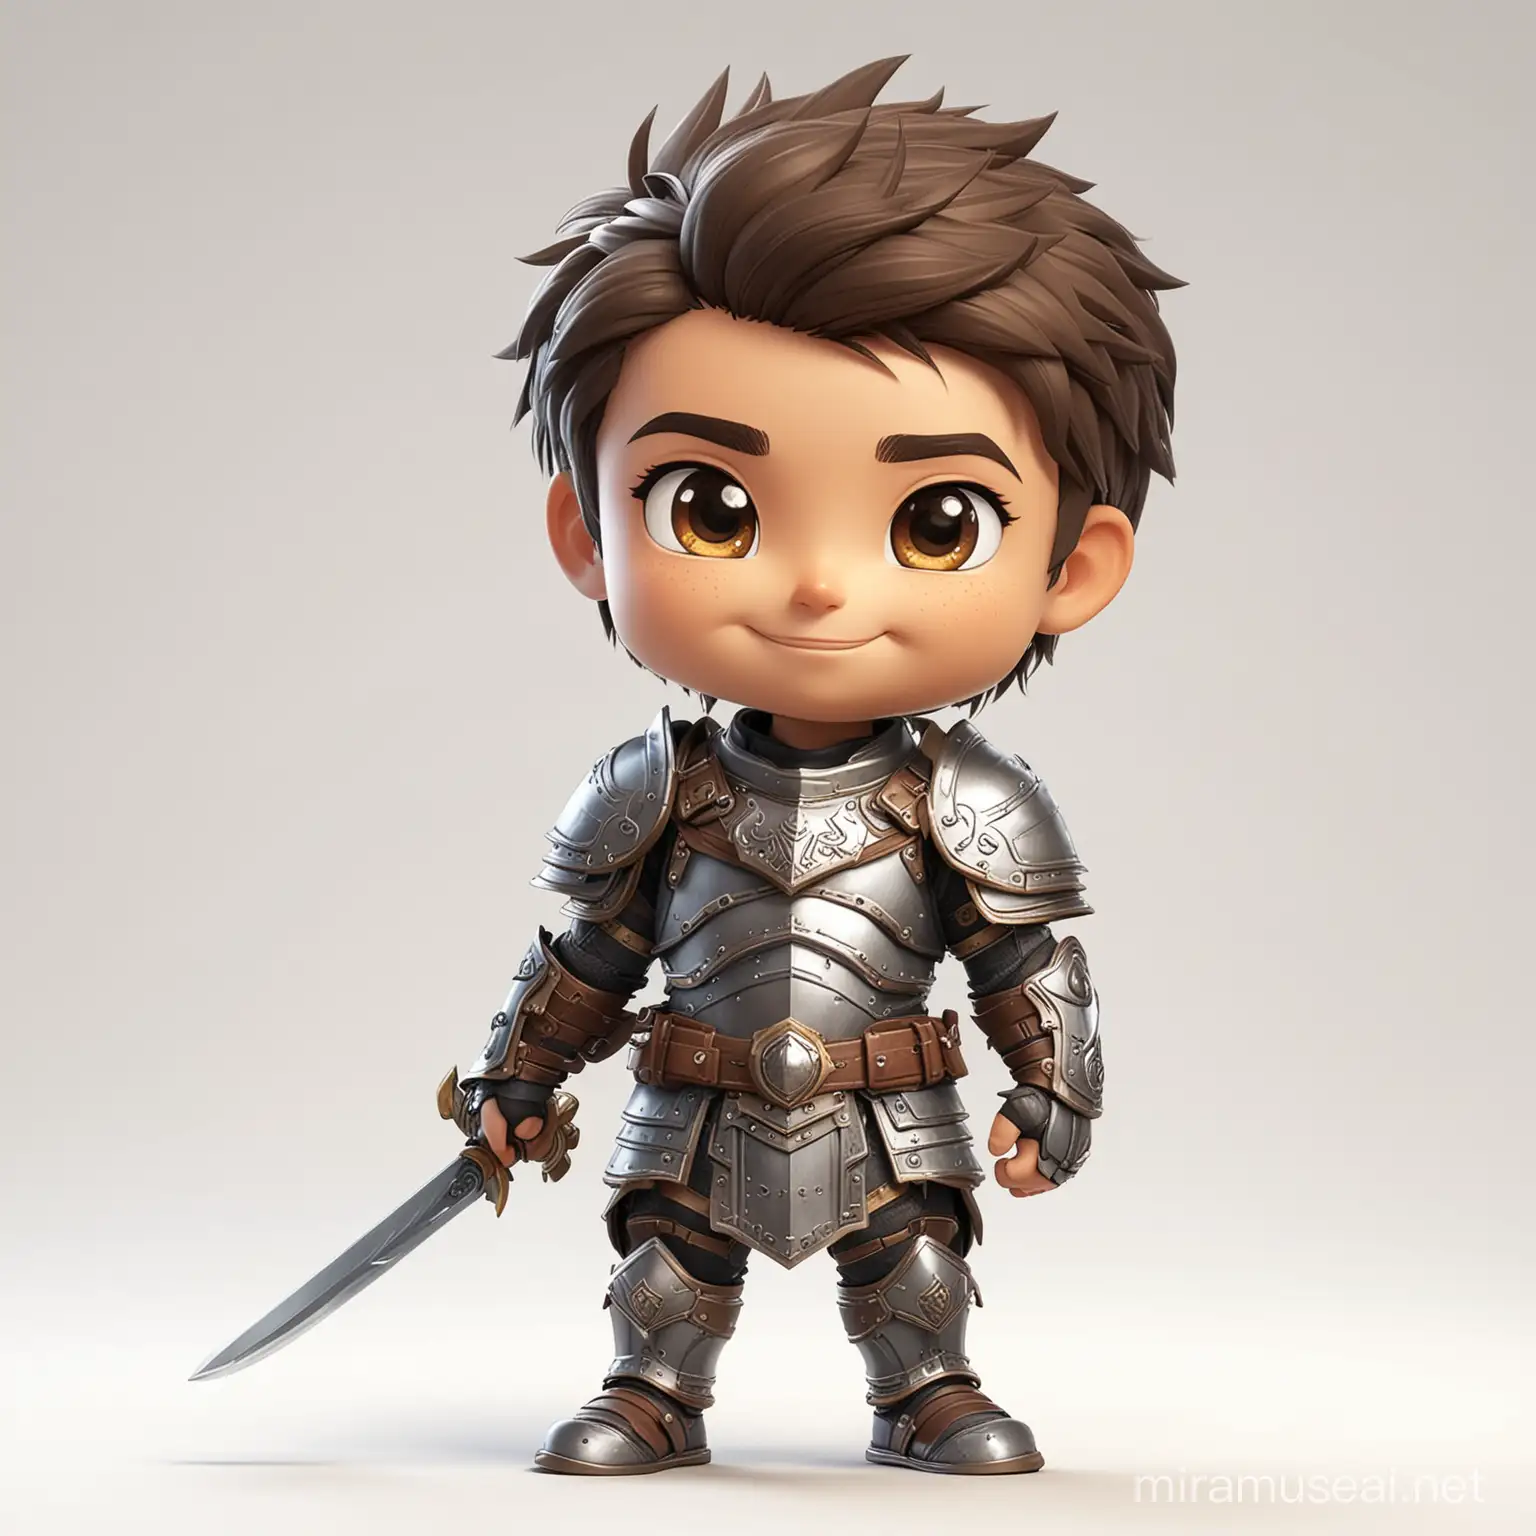 Cheerful Chibi Style Male Child Warrior in Armor on White Background